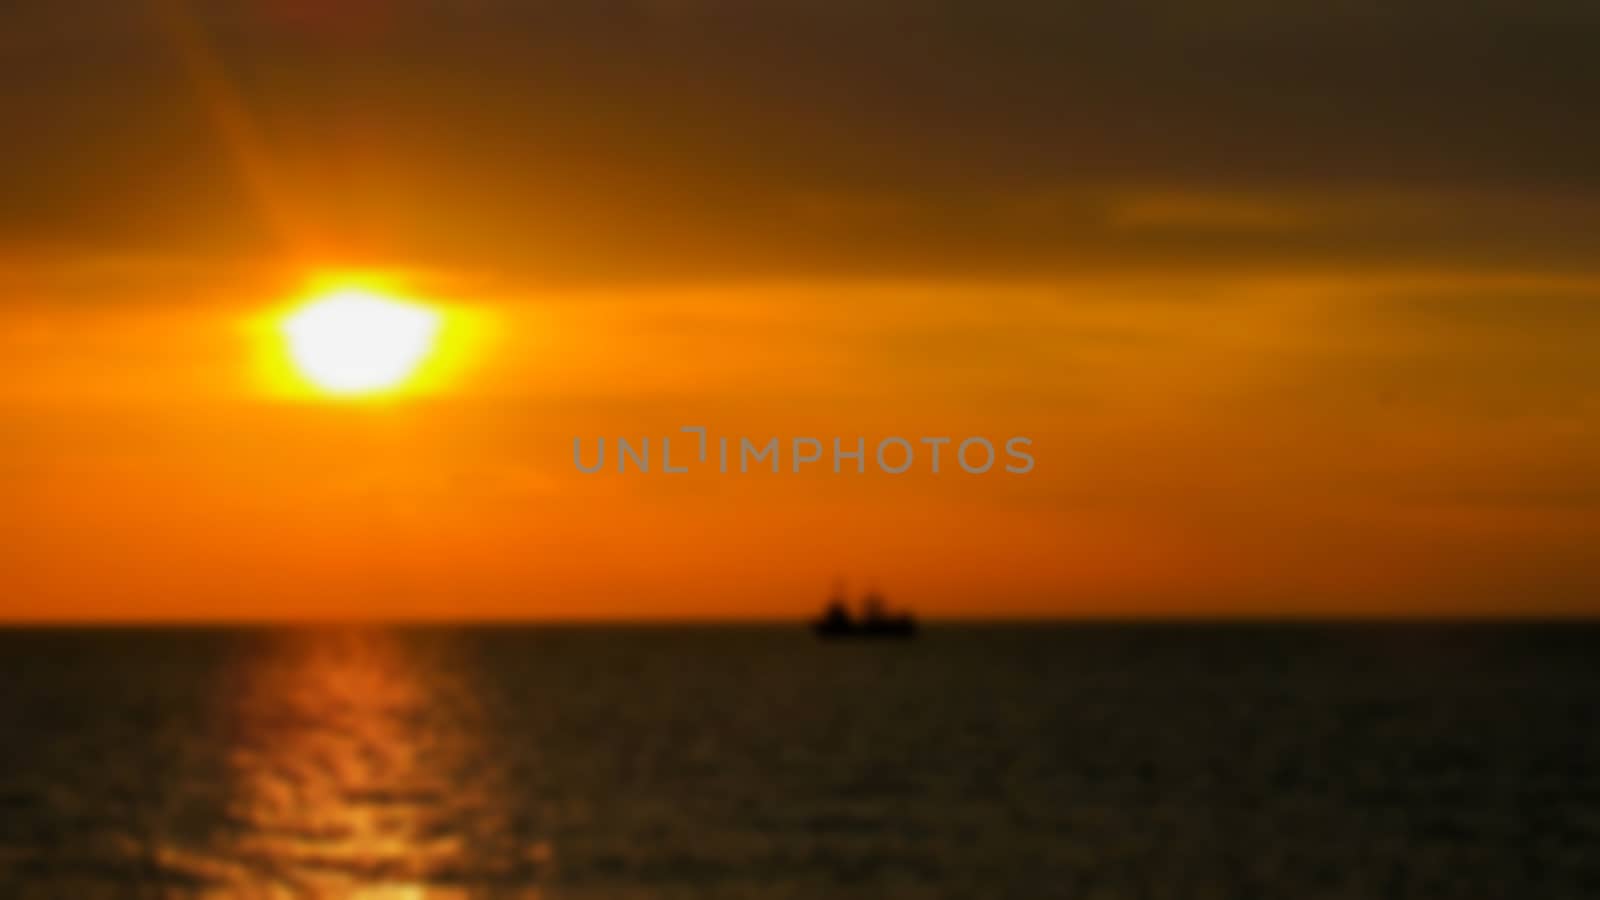 Creative sea evening landscape. Creative nature theme with blur and bokeh effect for design as background.
                   